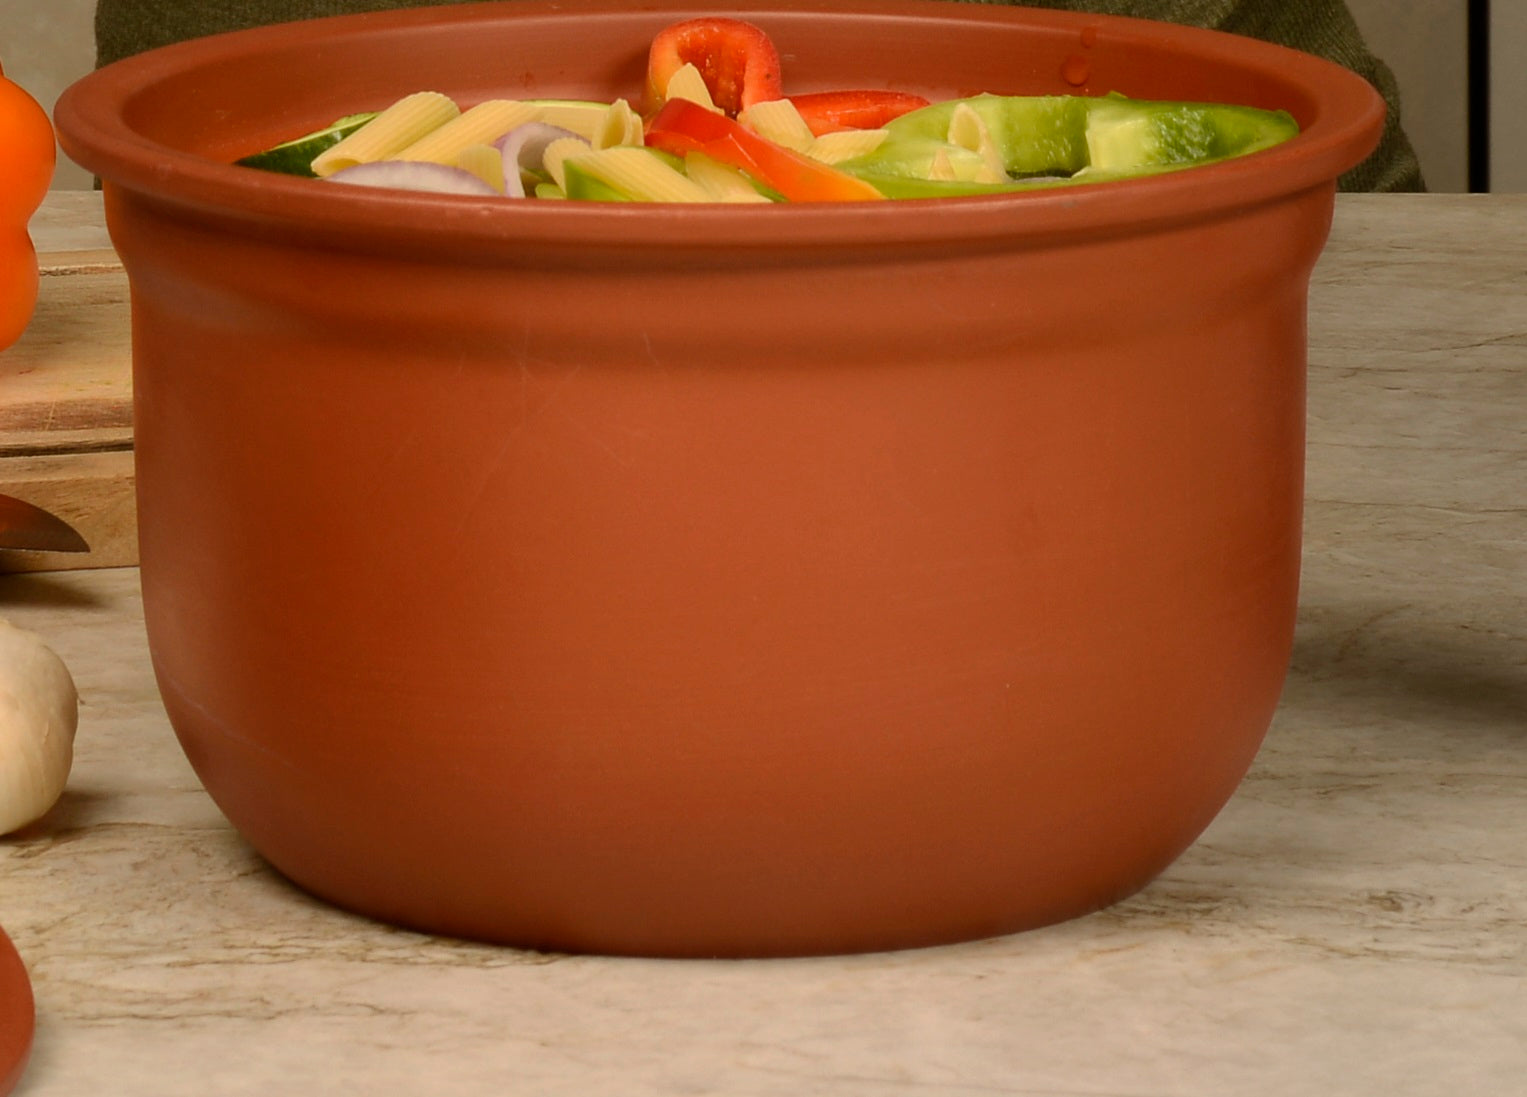 Clay Cooking Pot Care: How to Clean a Clay Pot